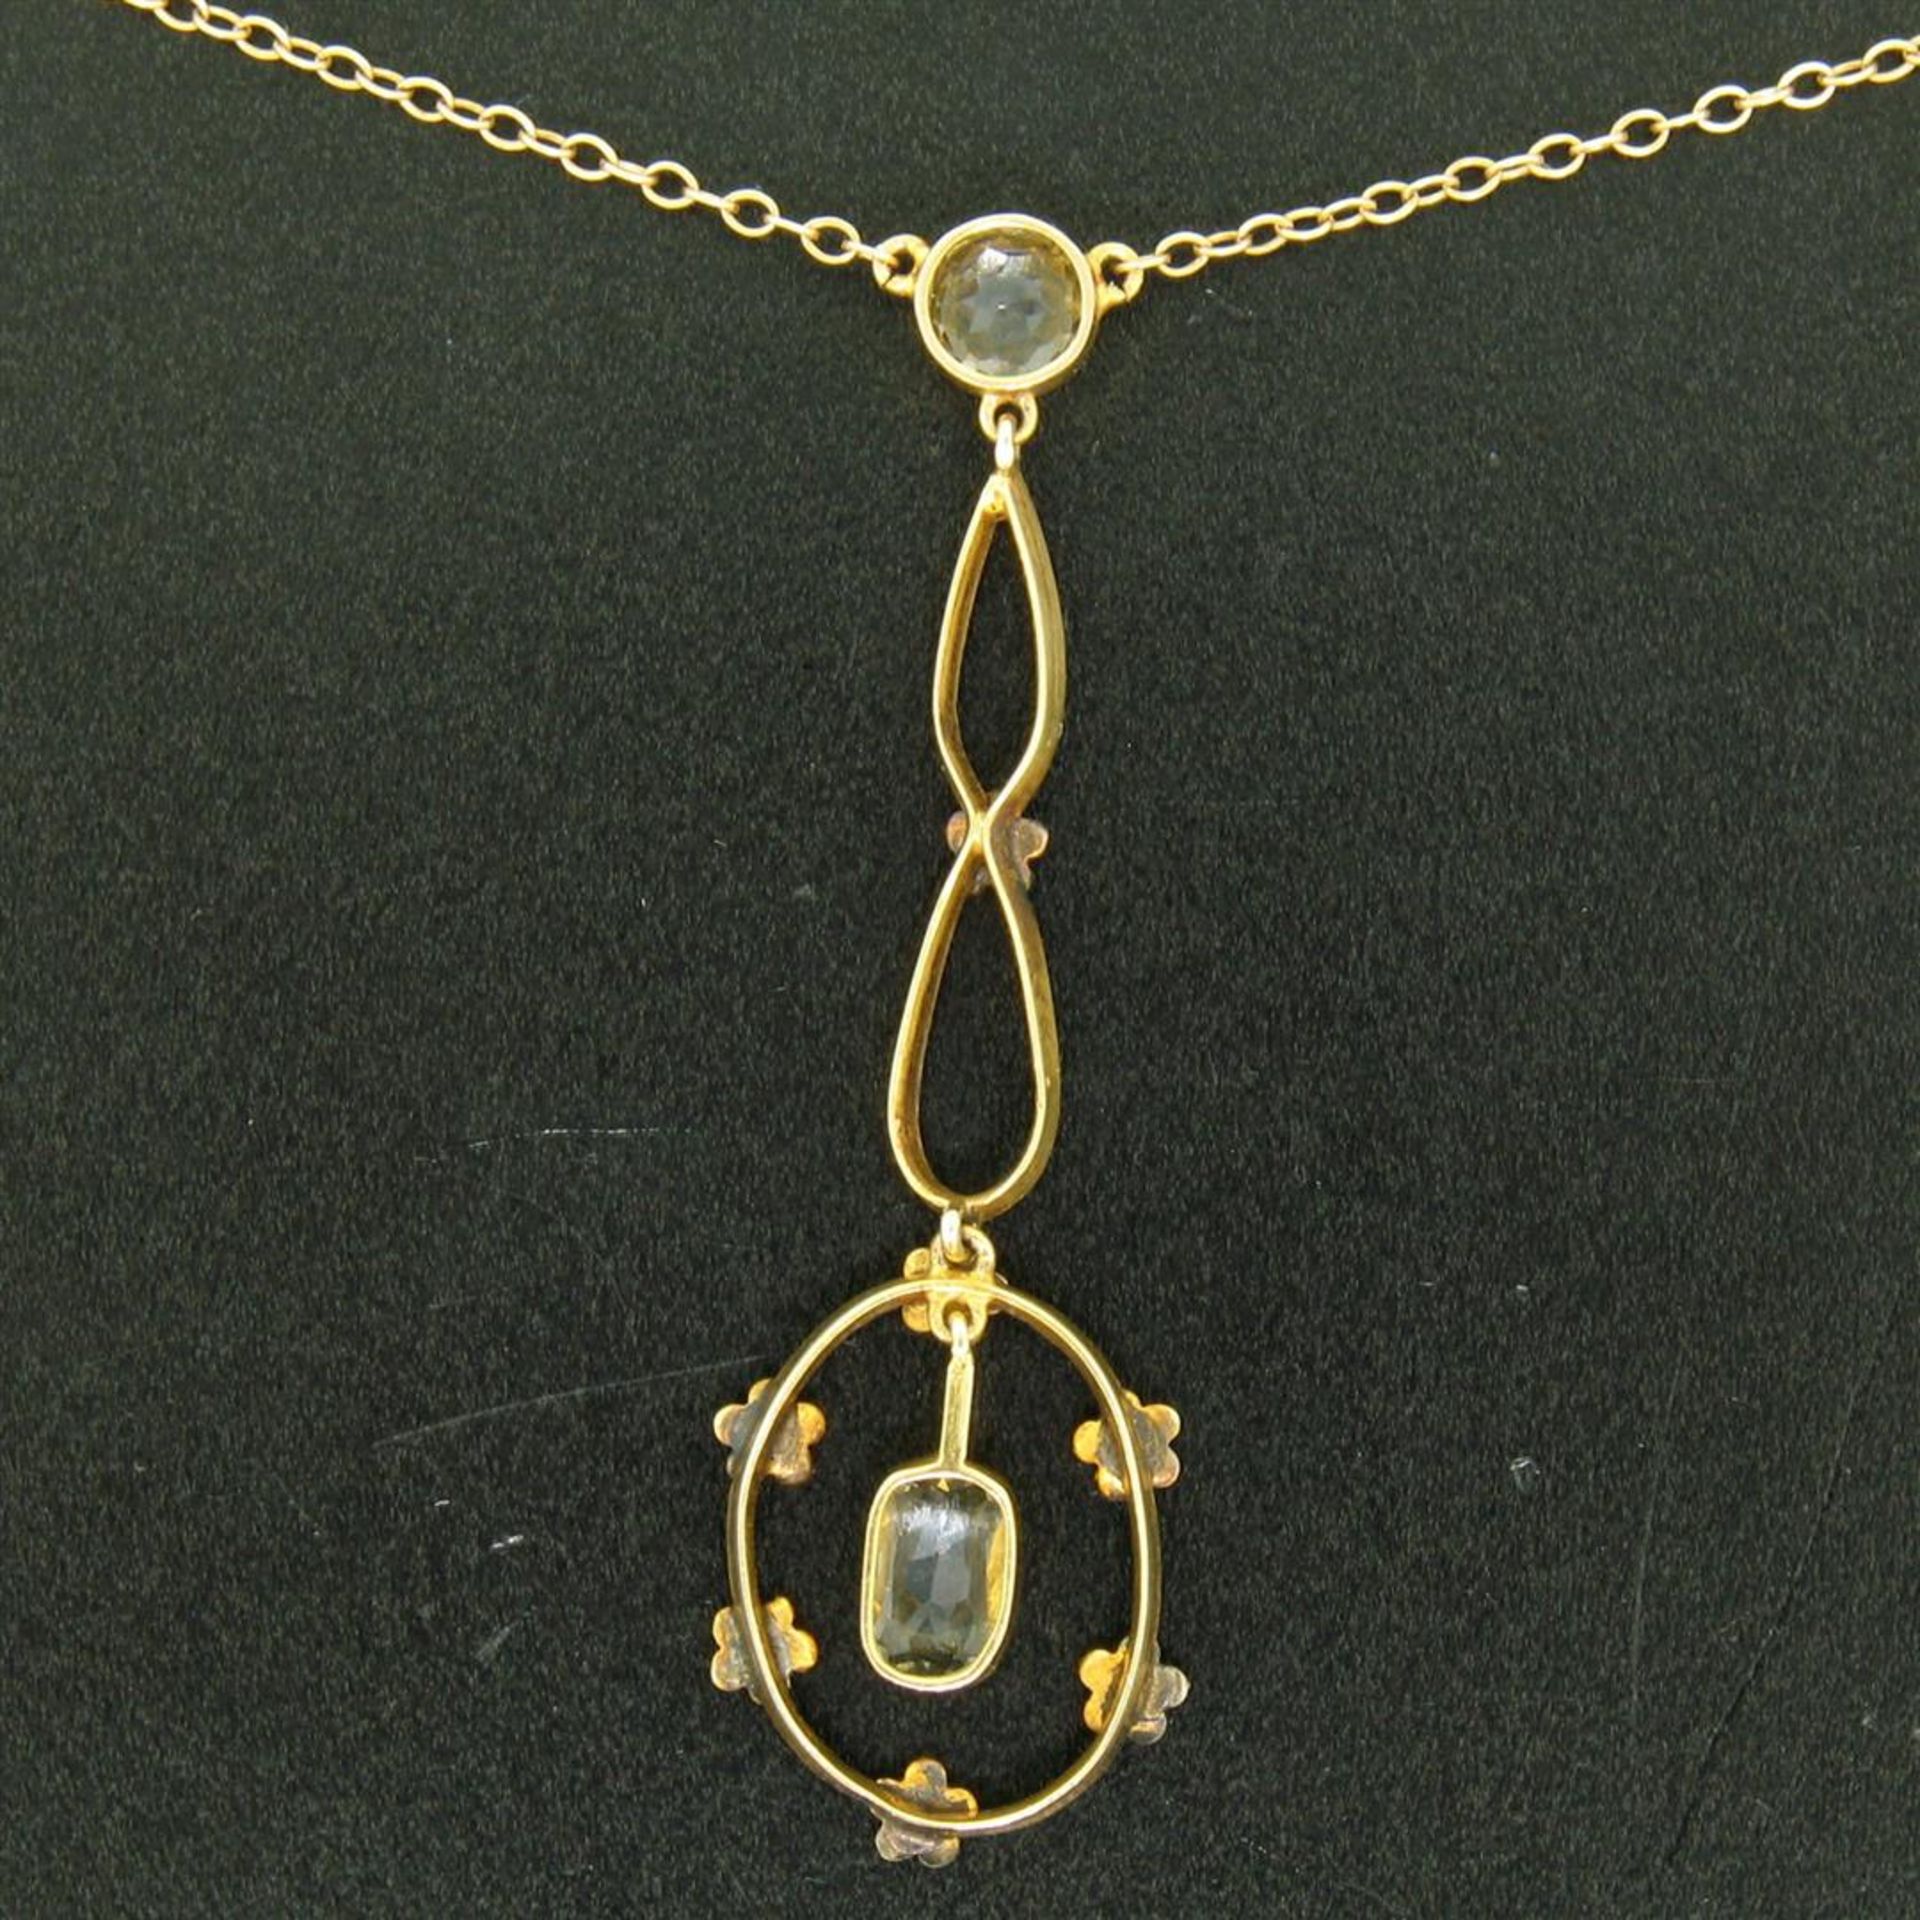 Antique Victorian 10k Yellow Gold Aquamarine Seed Pearl Dangle Pendant Necklace - Image 6 of 9